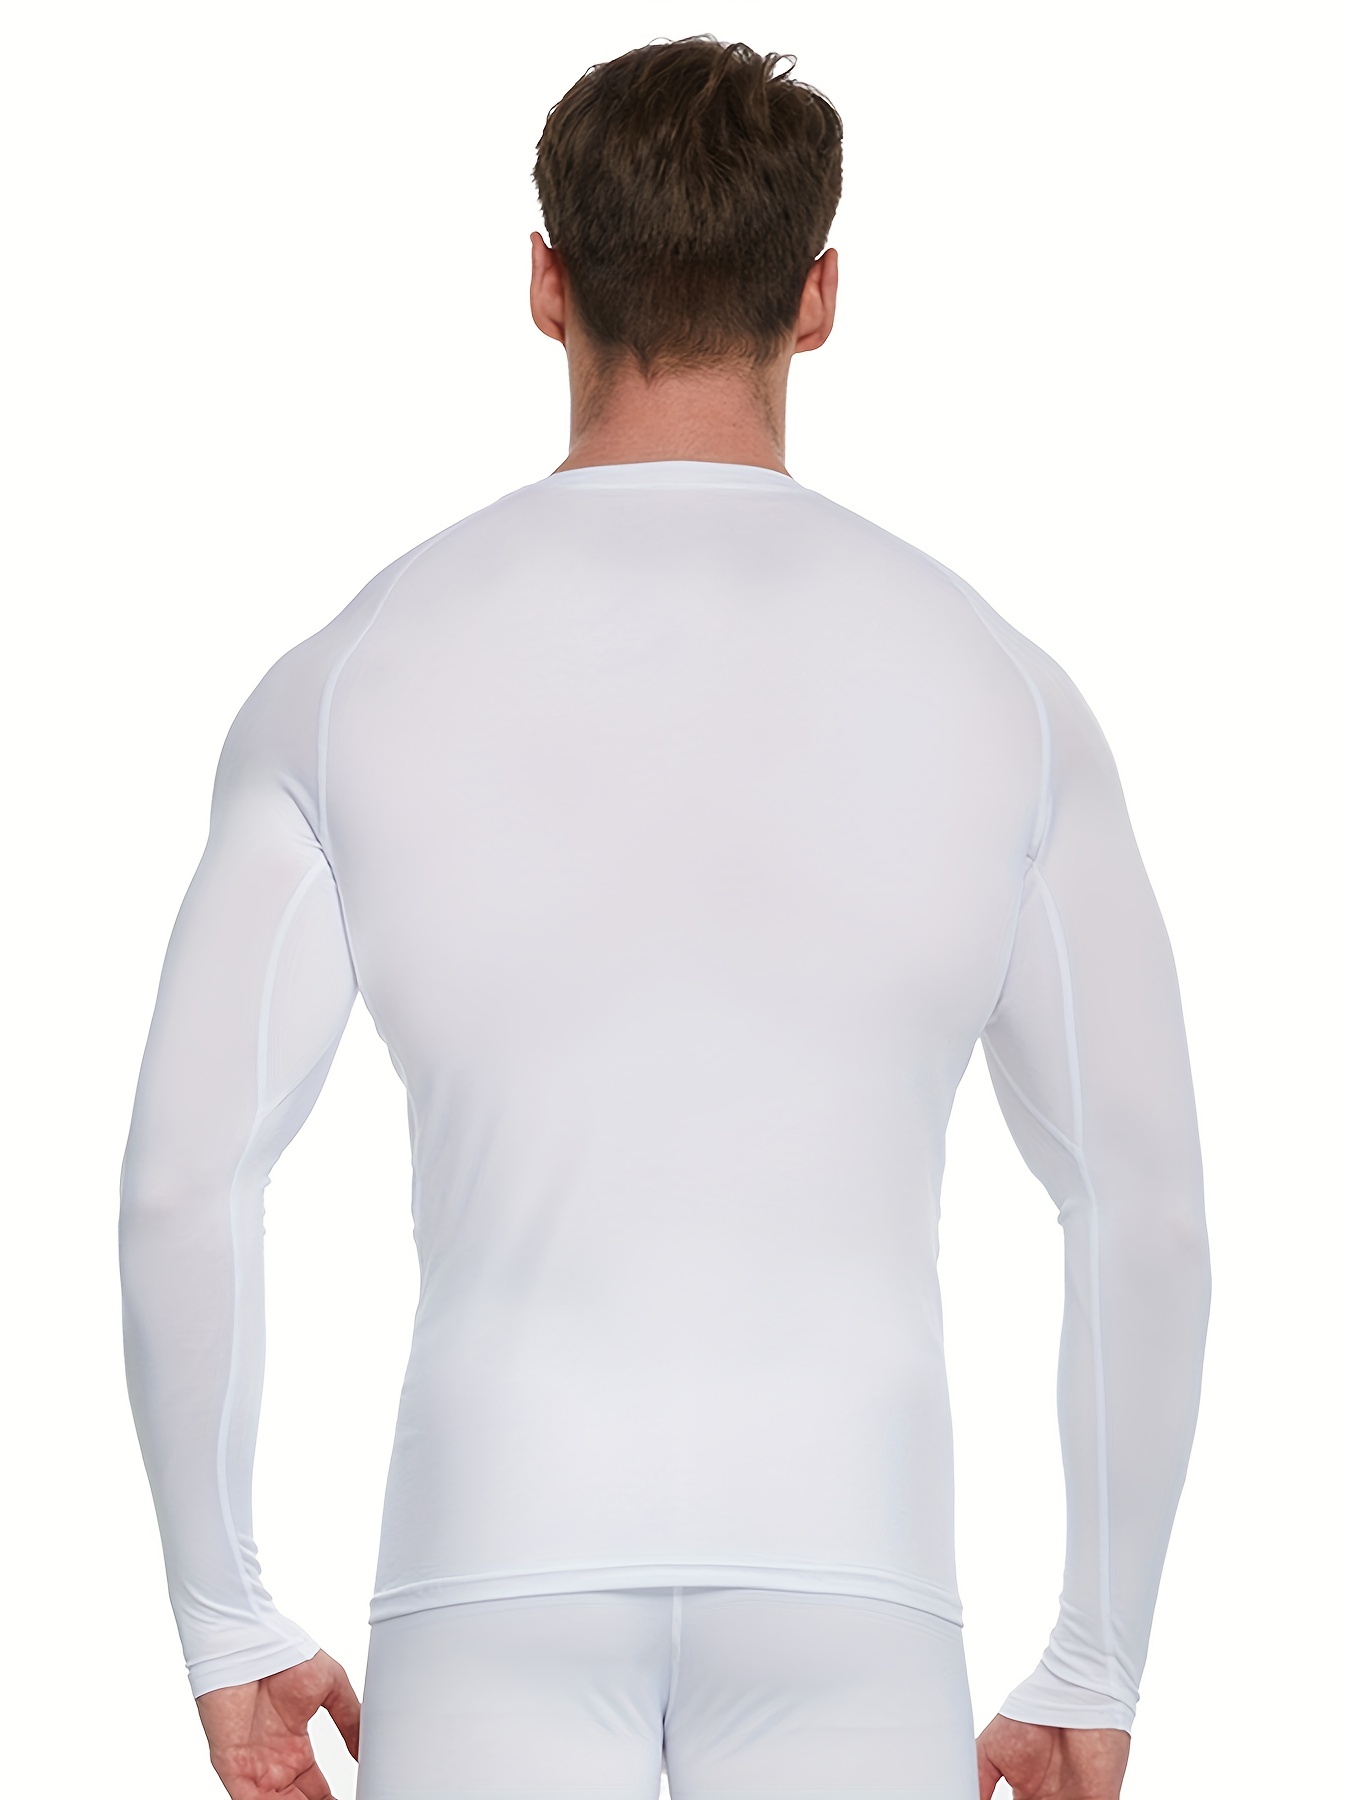 Leo Seamless Compression Shirt with Total Comfort Technology T-Sport -  Black L